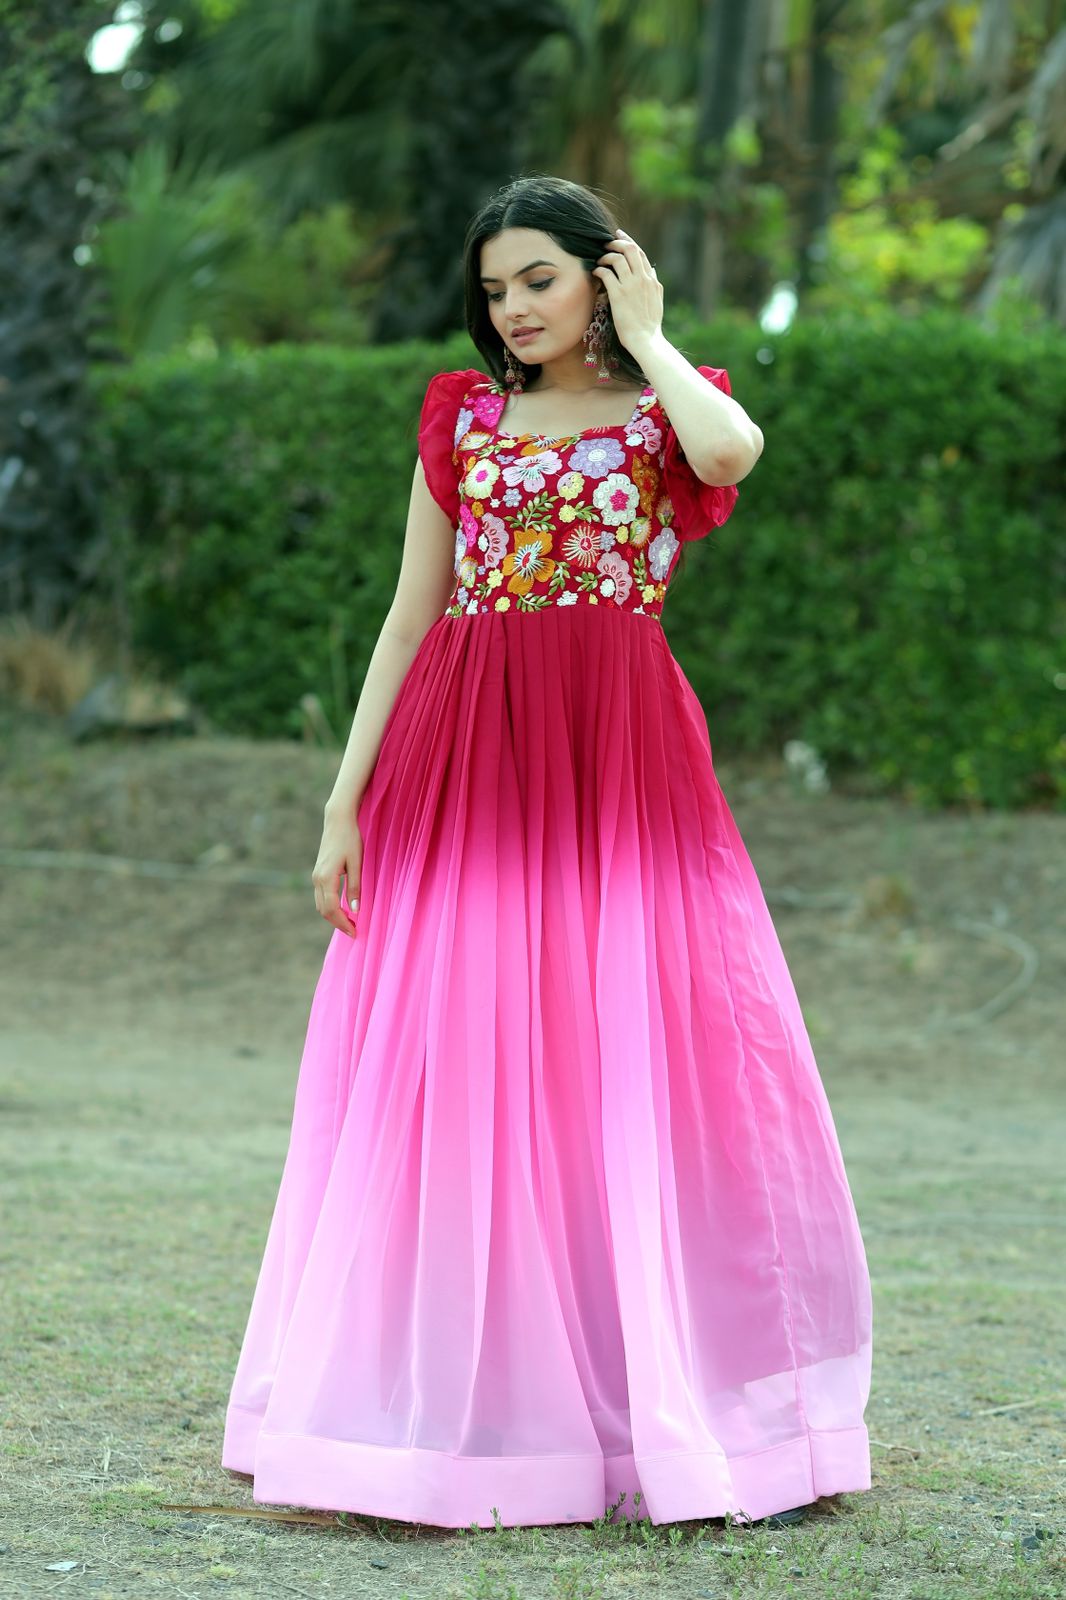 Women Clothing Collection - Buy Branded Women Designer Dresses | Net dress  design, Frocks and gowns, Ladies frock design